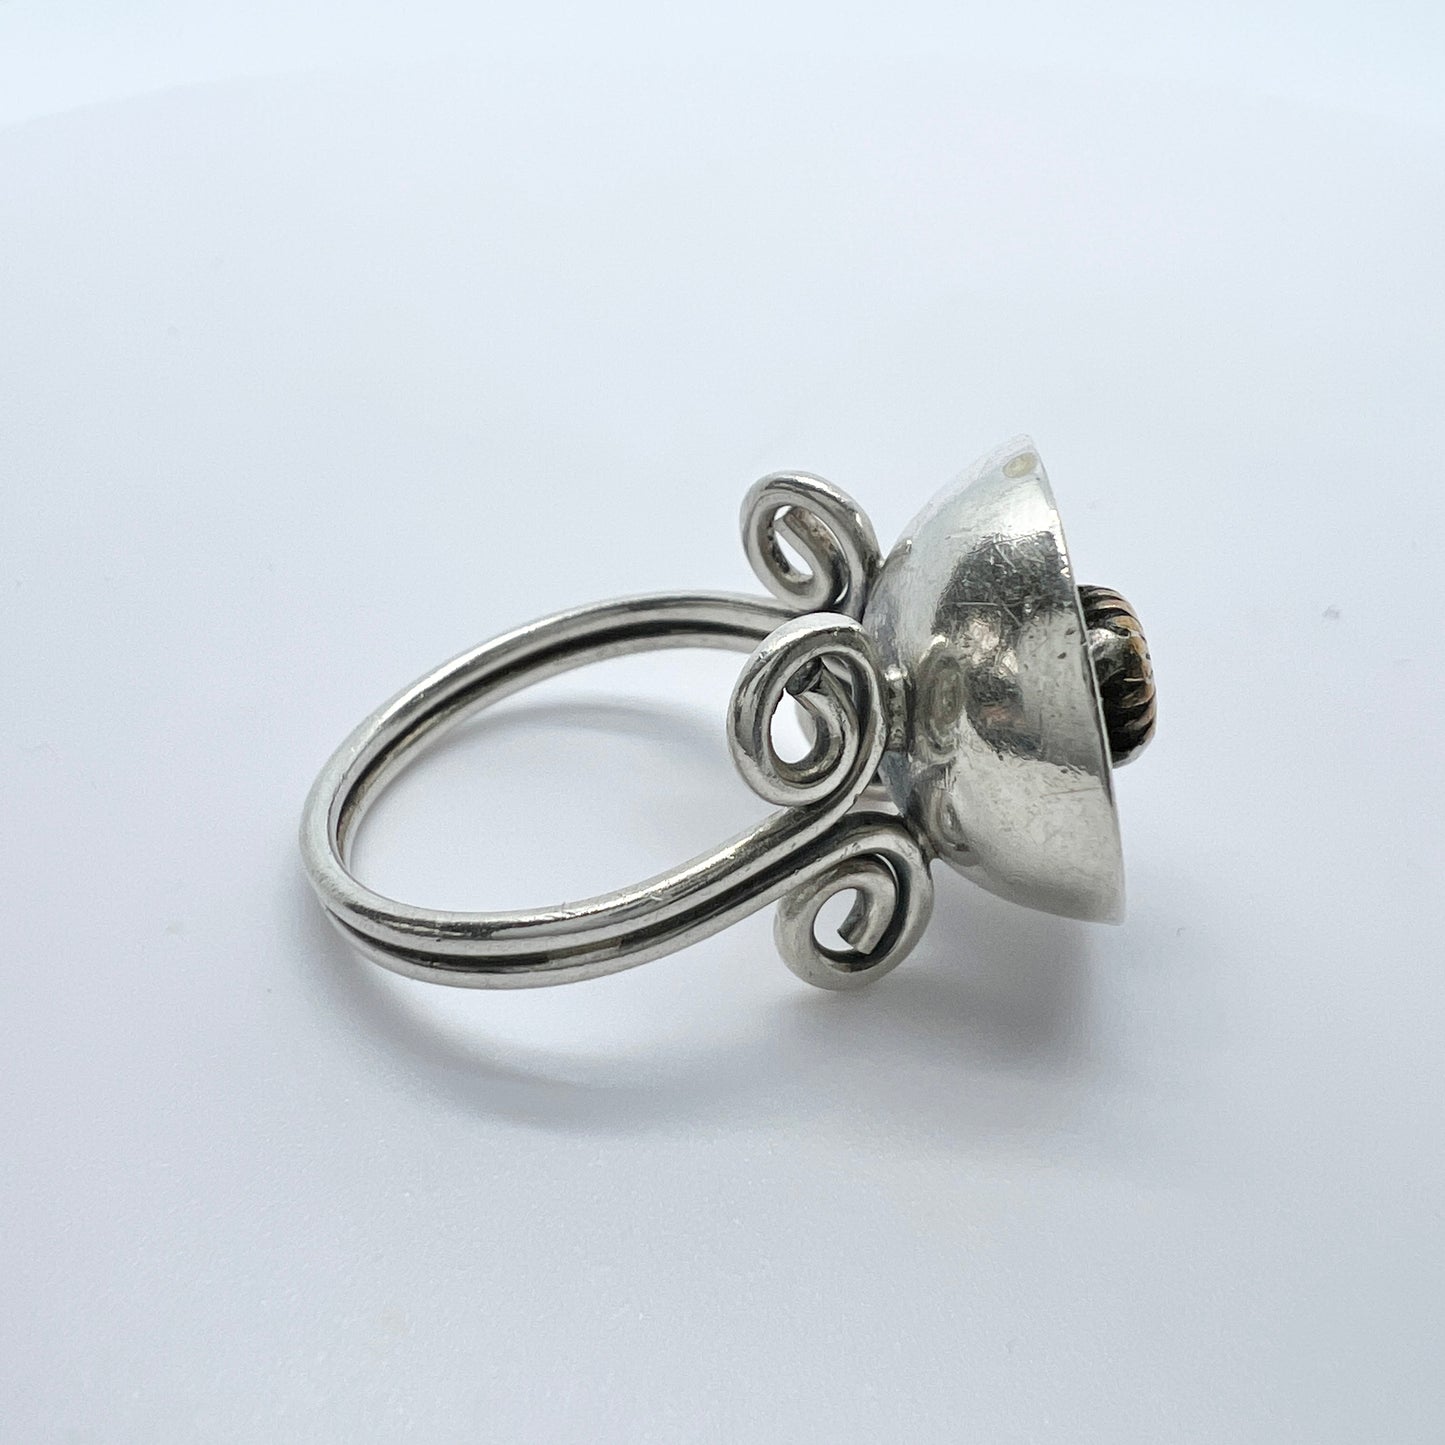 Vintage 1950-60s Sterling Silver Ring.